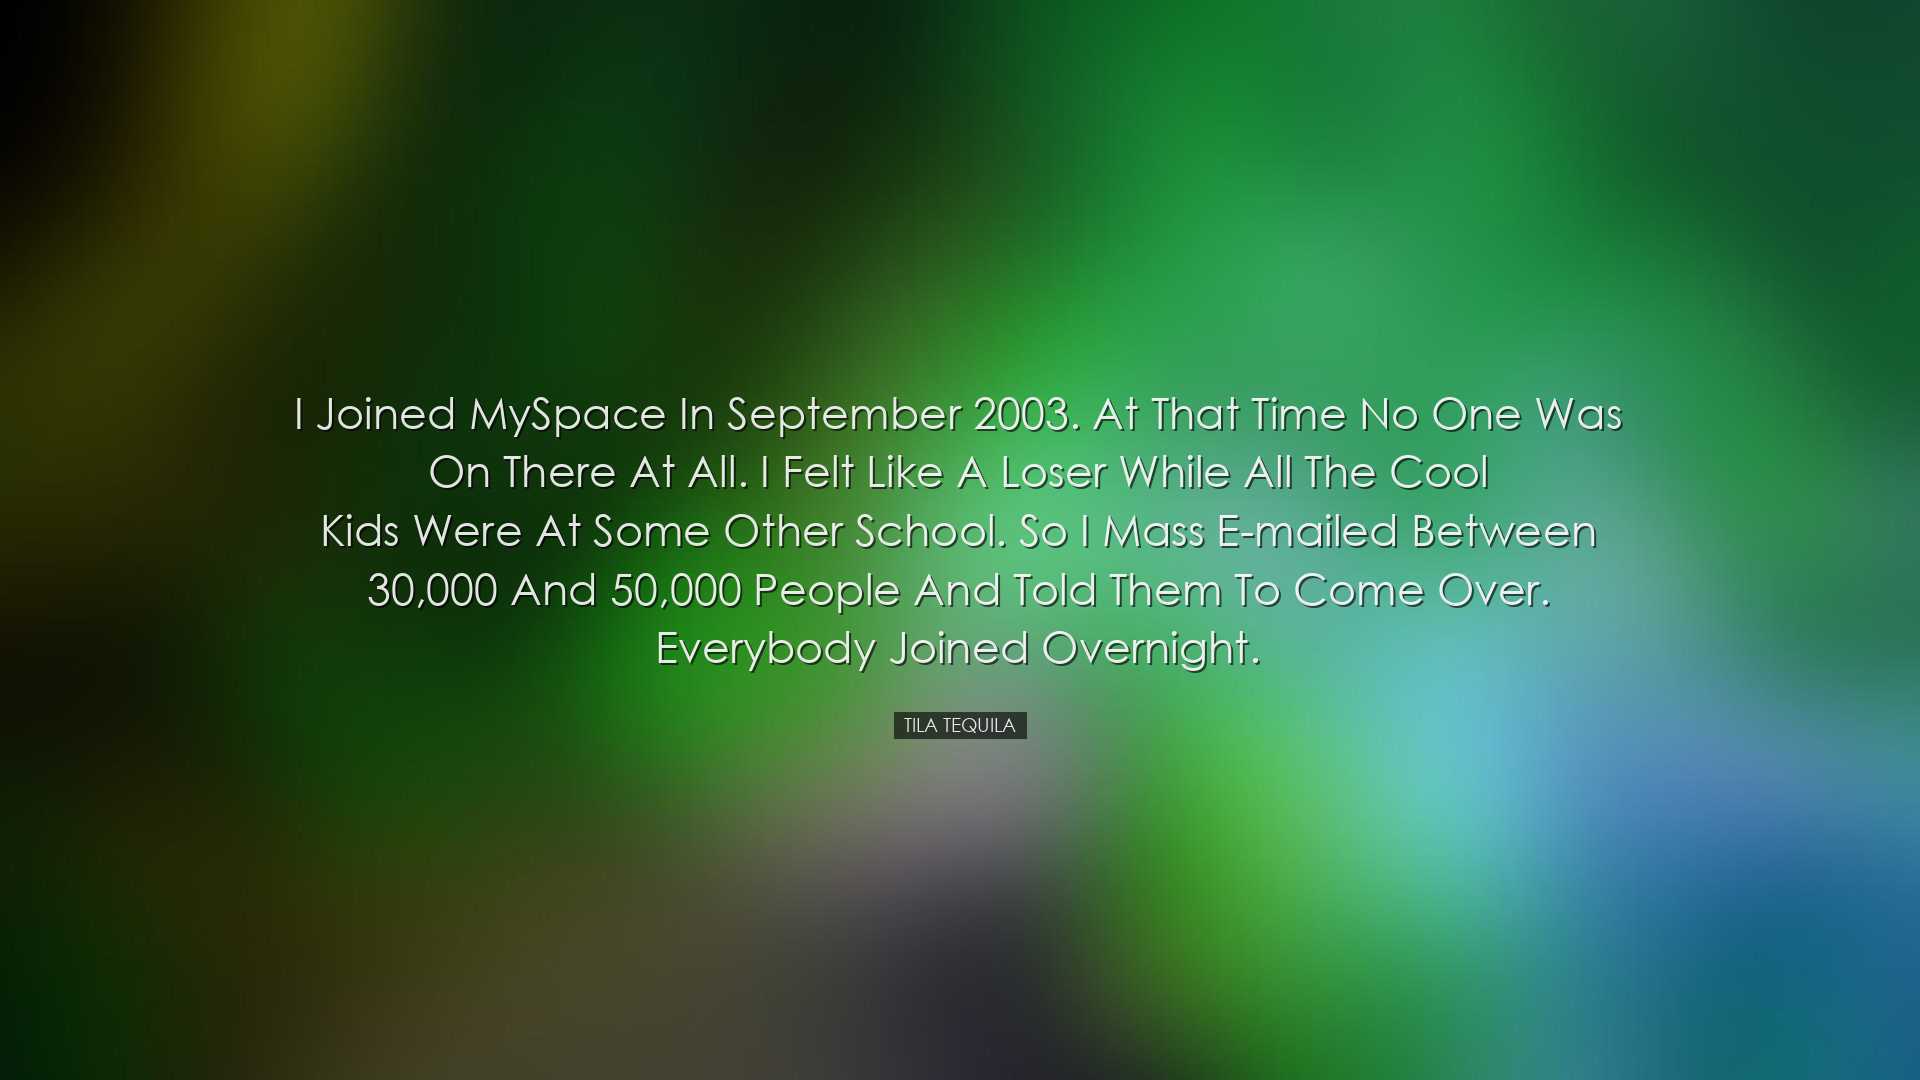 I joined MySpace in September 2003. At that time no one was on the